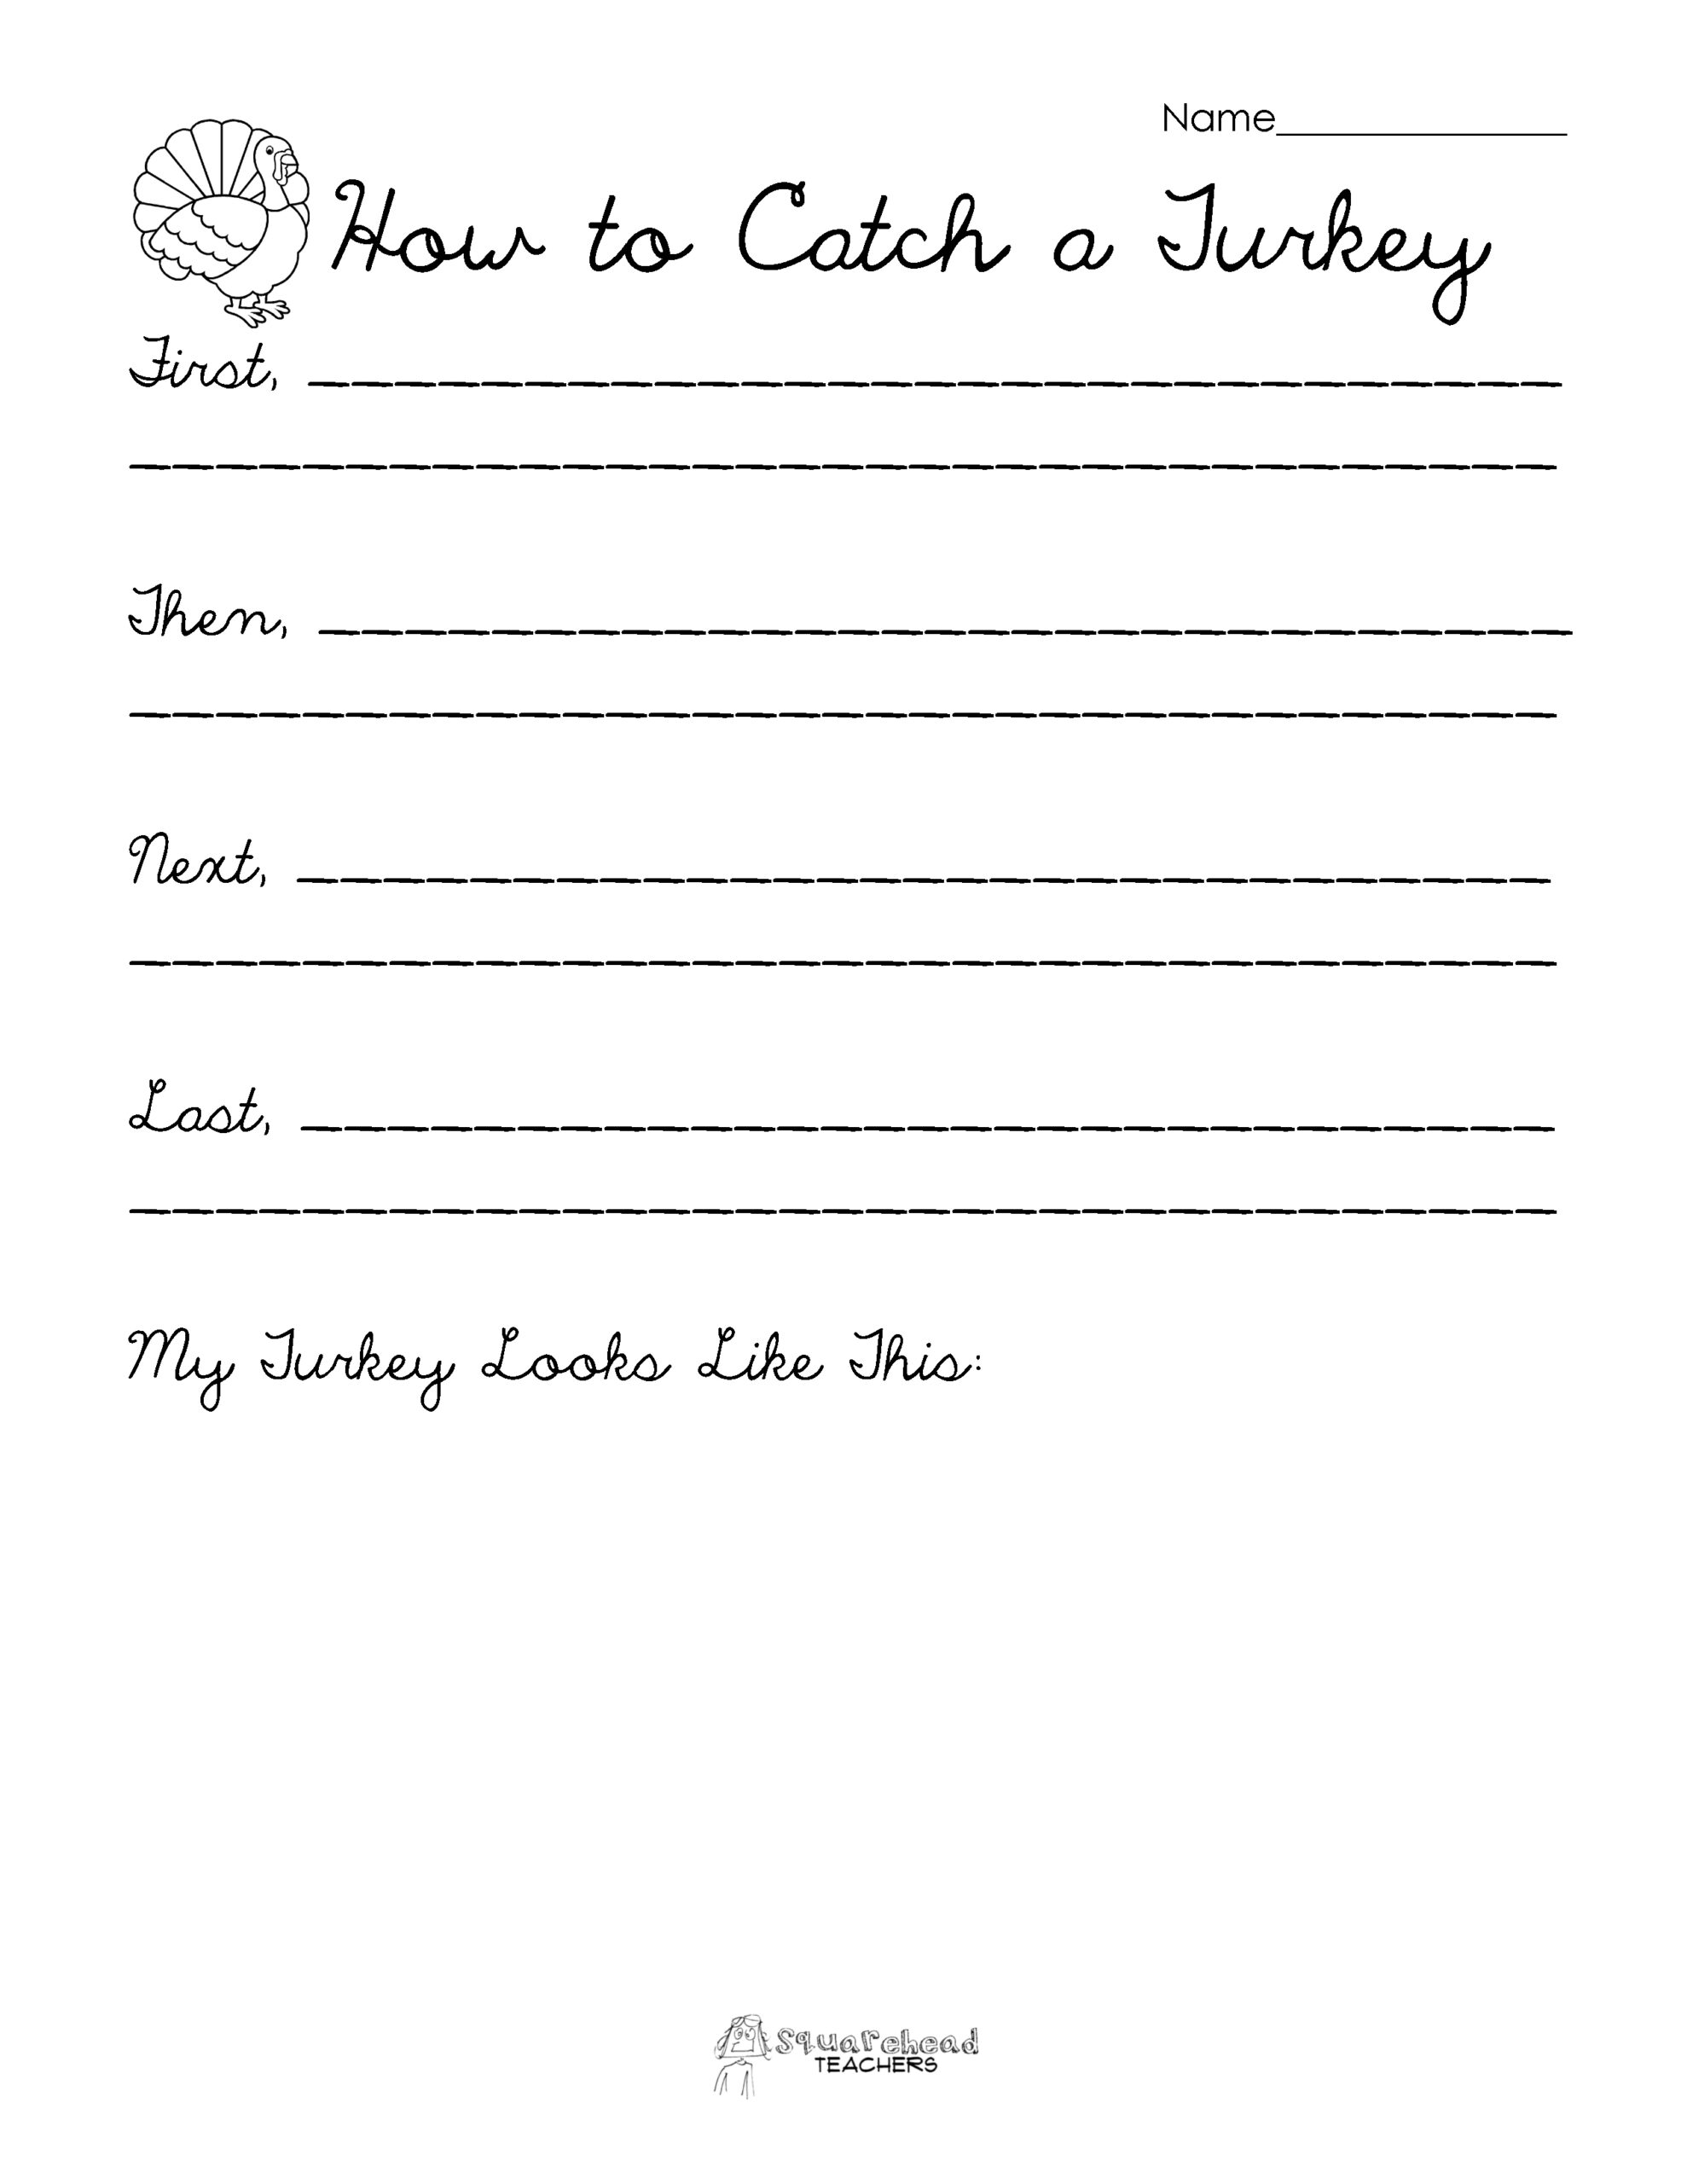 How To Catch A Turkey Thanksgiving Writing Project For Kids Squarehead Teachers